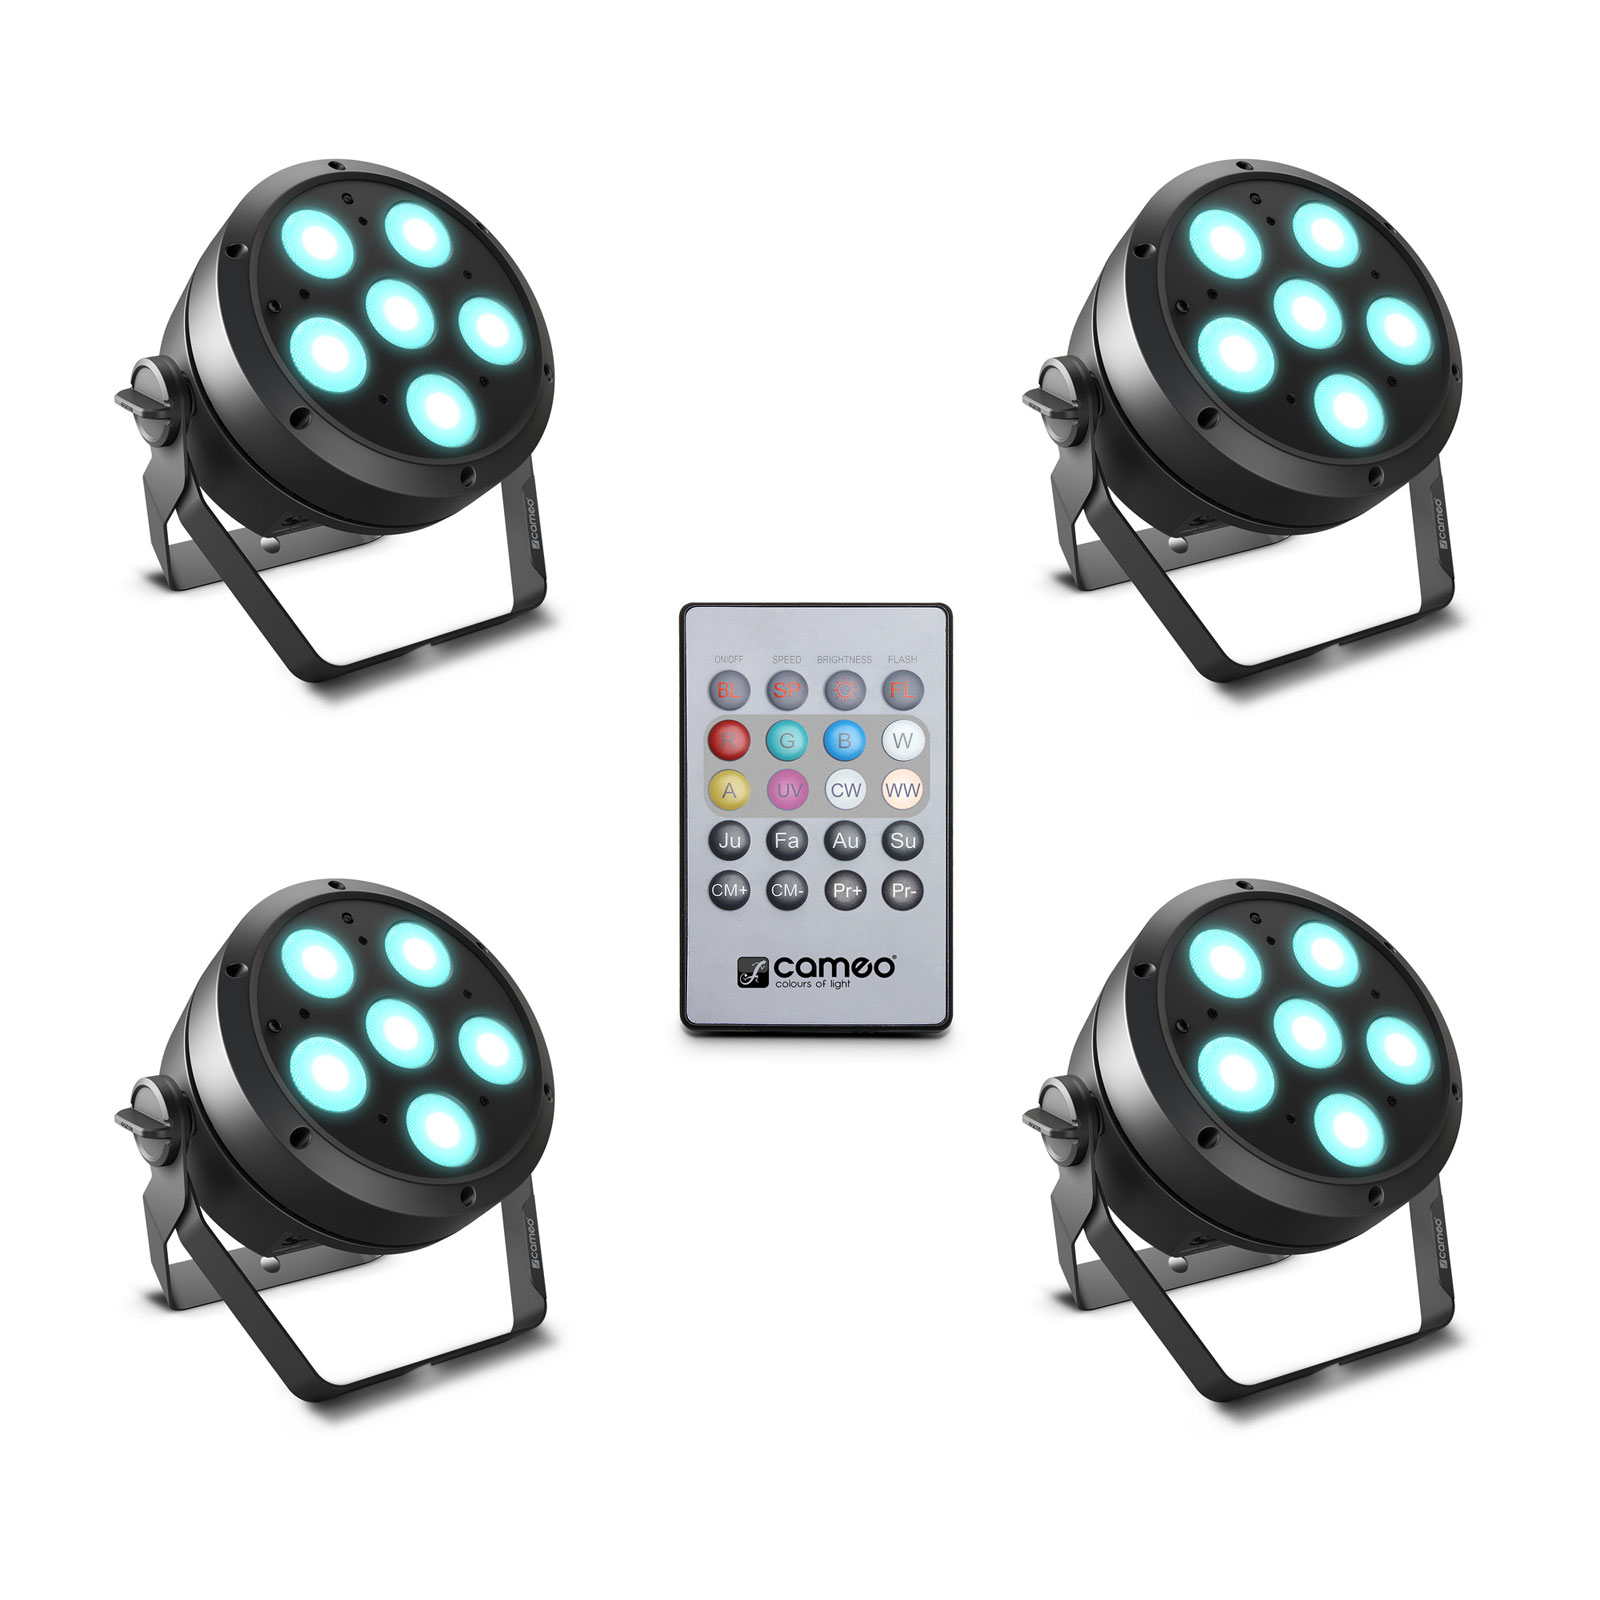 CAMEO ROOT PAR 6 SET 1 - SET COMPOSED OF 4 X CLROOTPAR6 WITH INFRARED REMOTE CONTROL